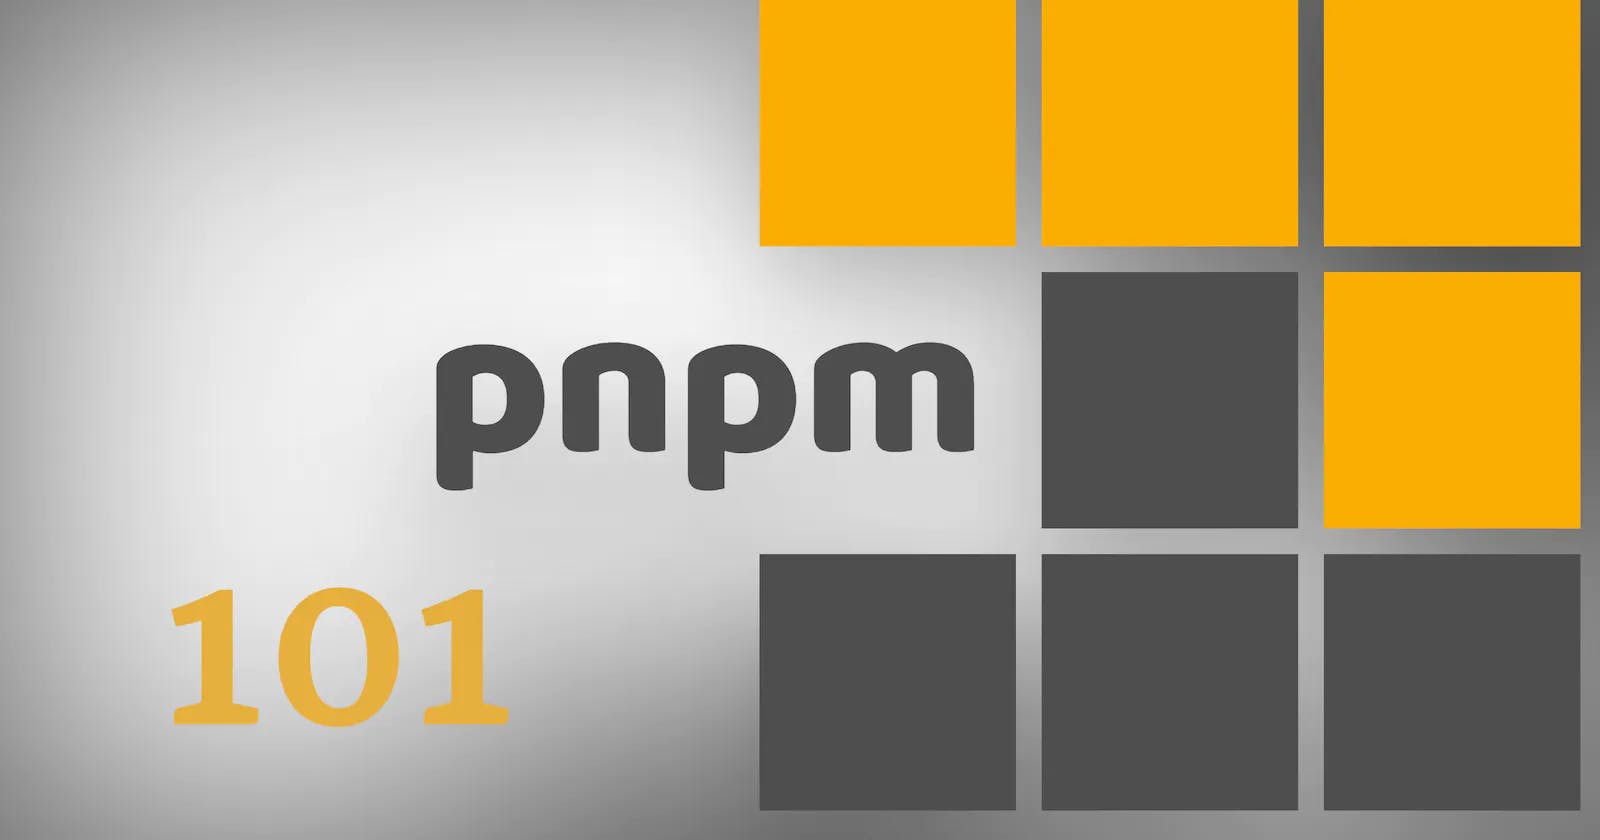 Who is using pnpm?